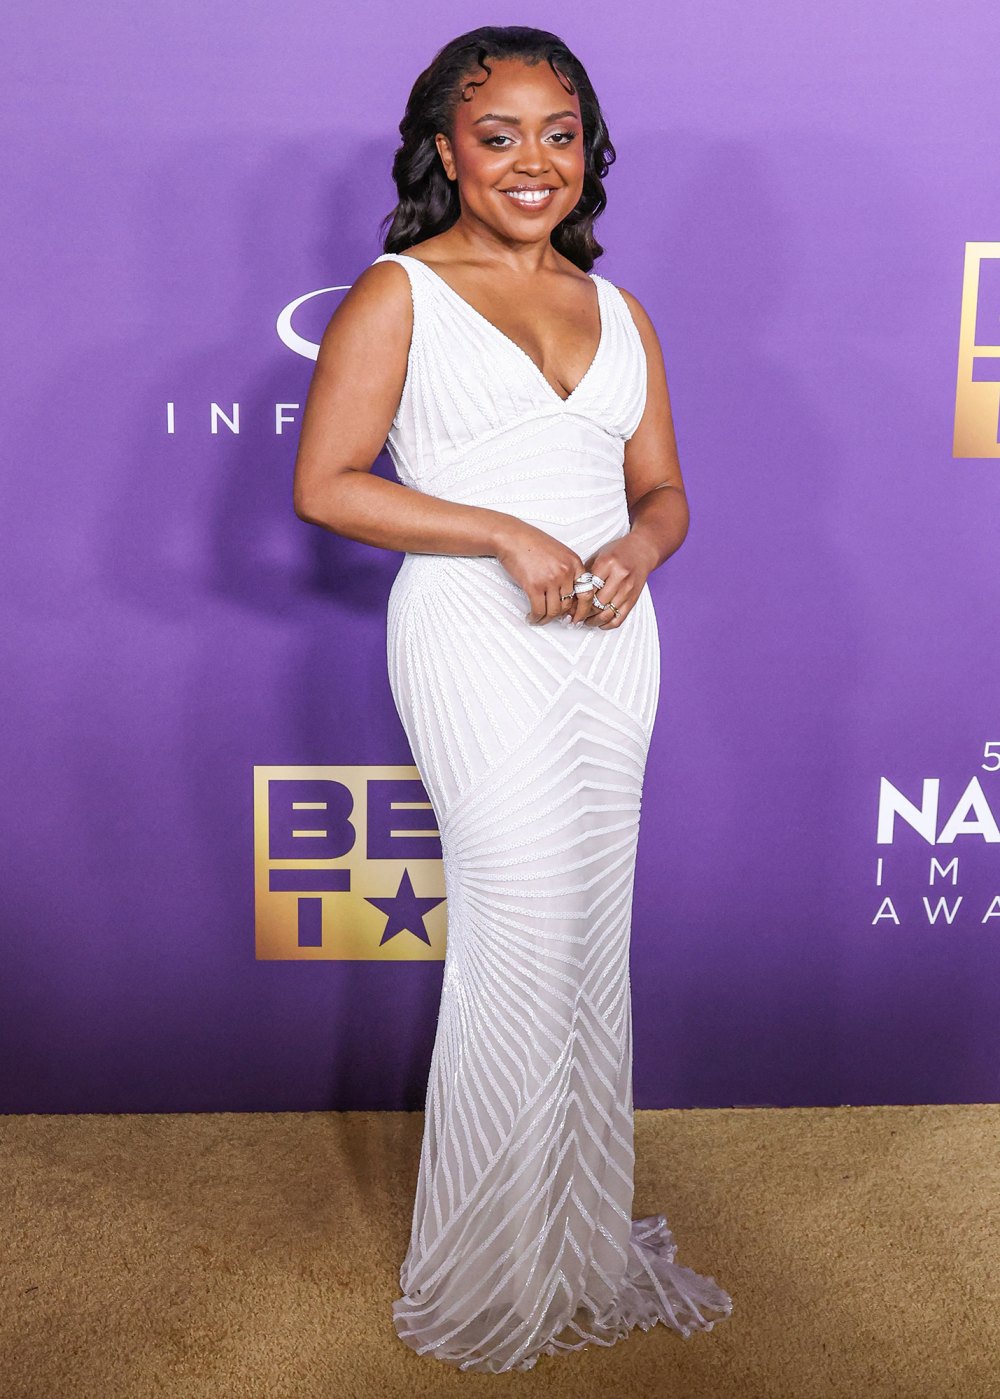 Quinta Brunson Shouts Out Her Lost Earrings in NAACP Image Awards Acceptance Speech